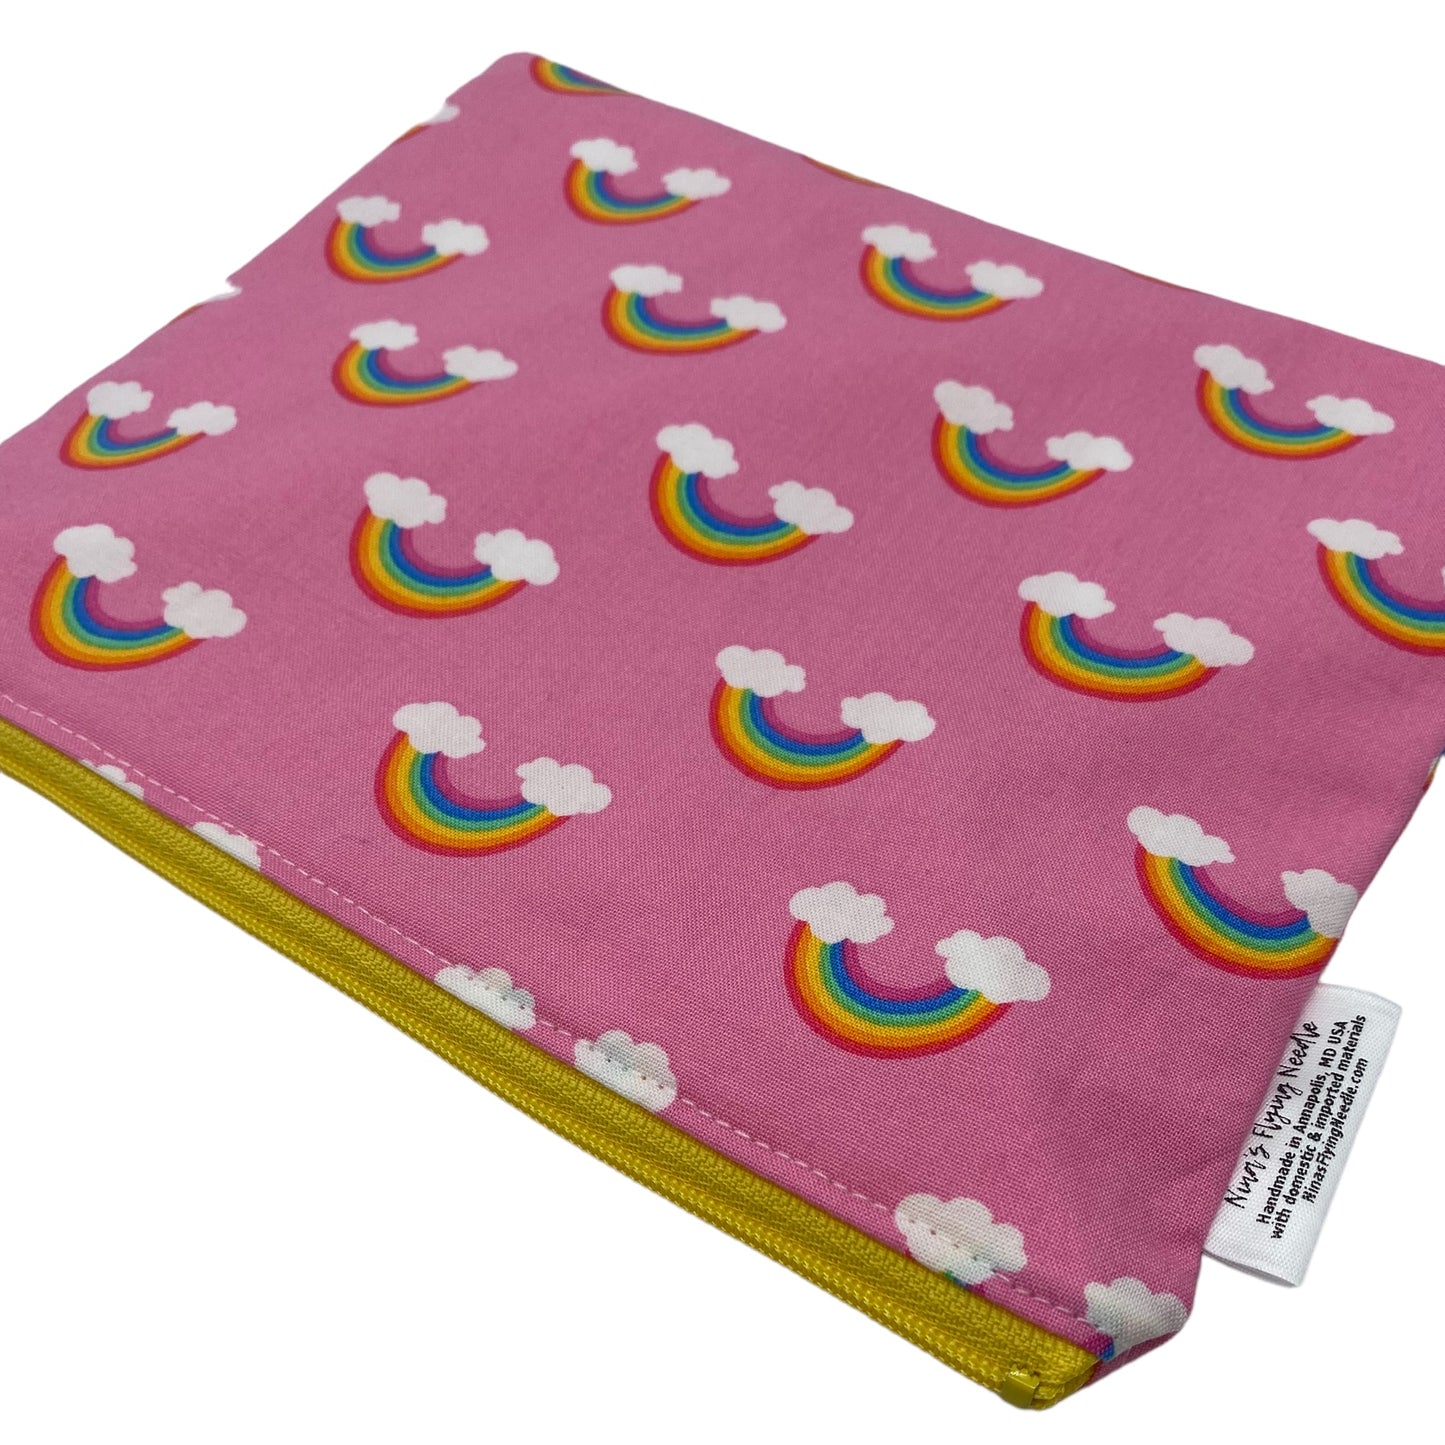 Sandwich Sized Reusable Zippered Bag Rainbows on Clouds